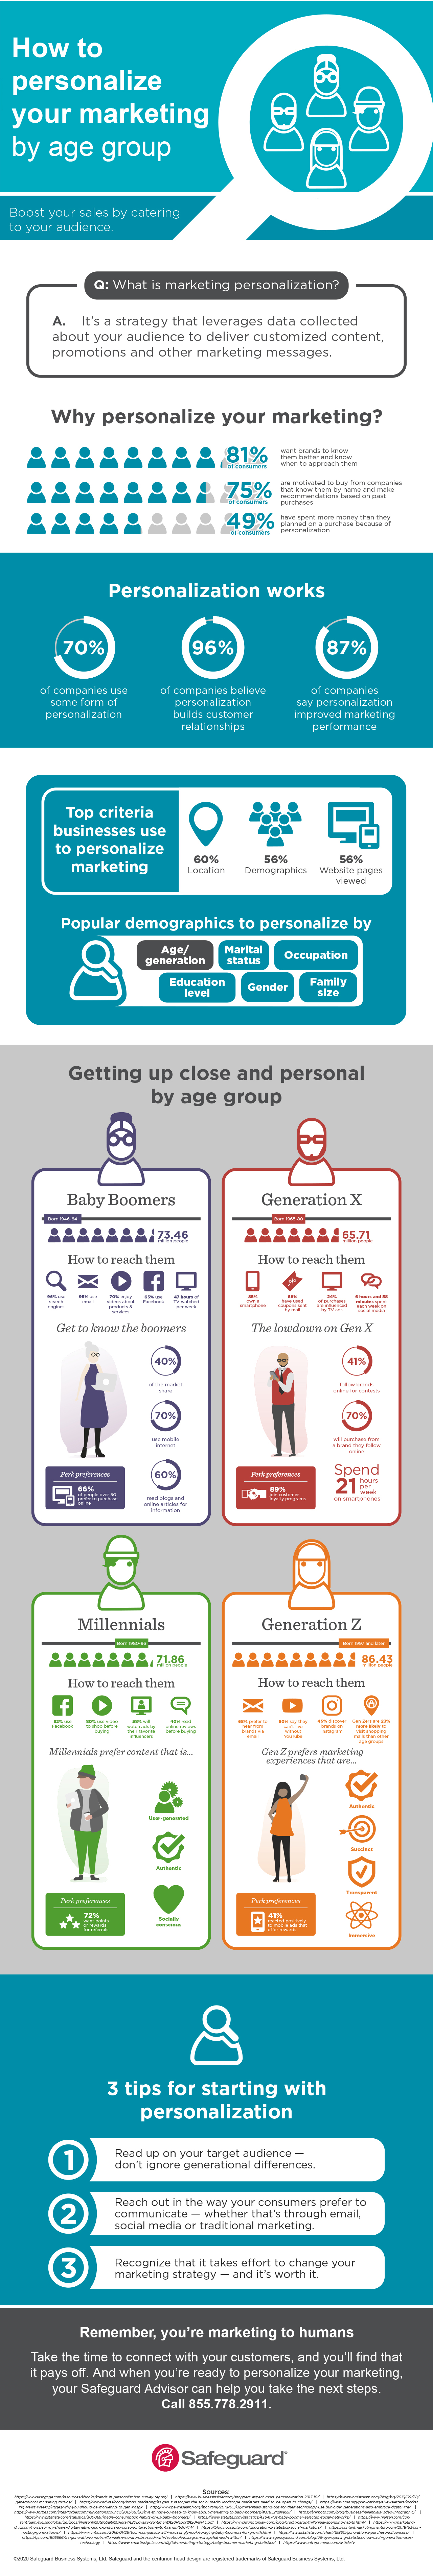 How to Personalize Your Marketing by Age Group